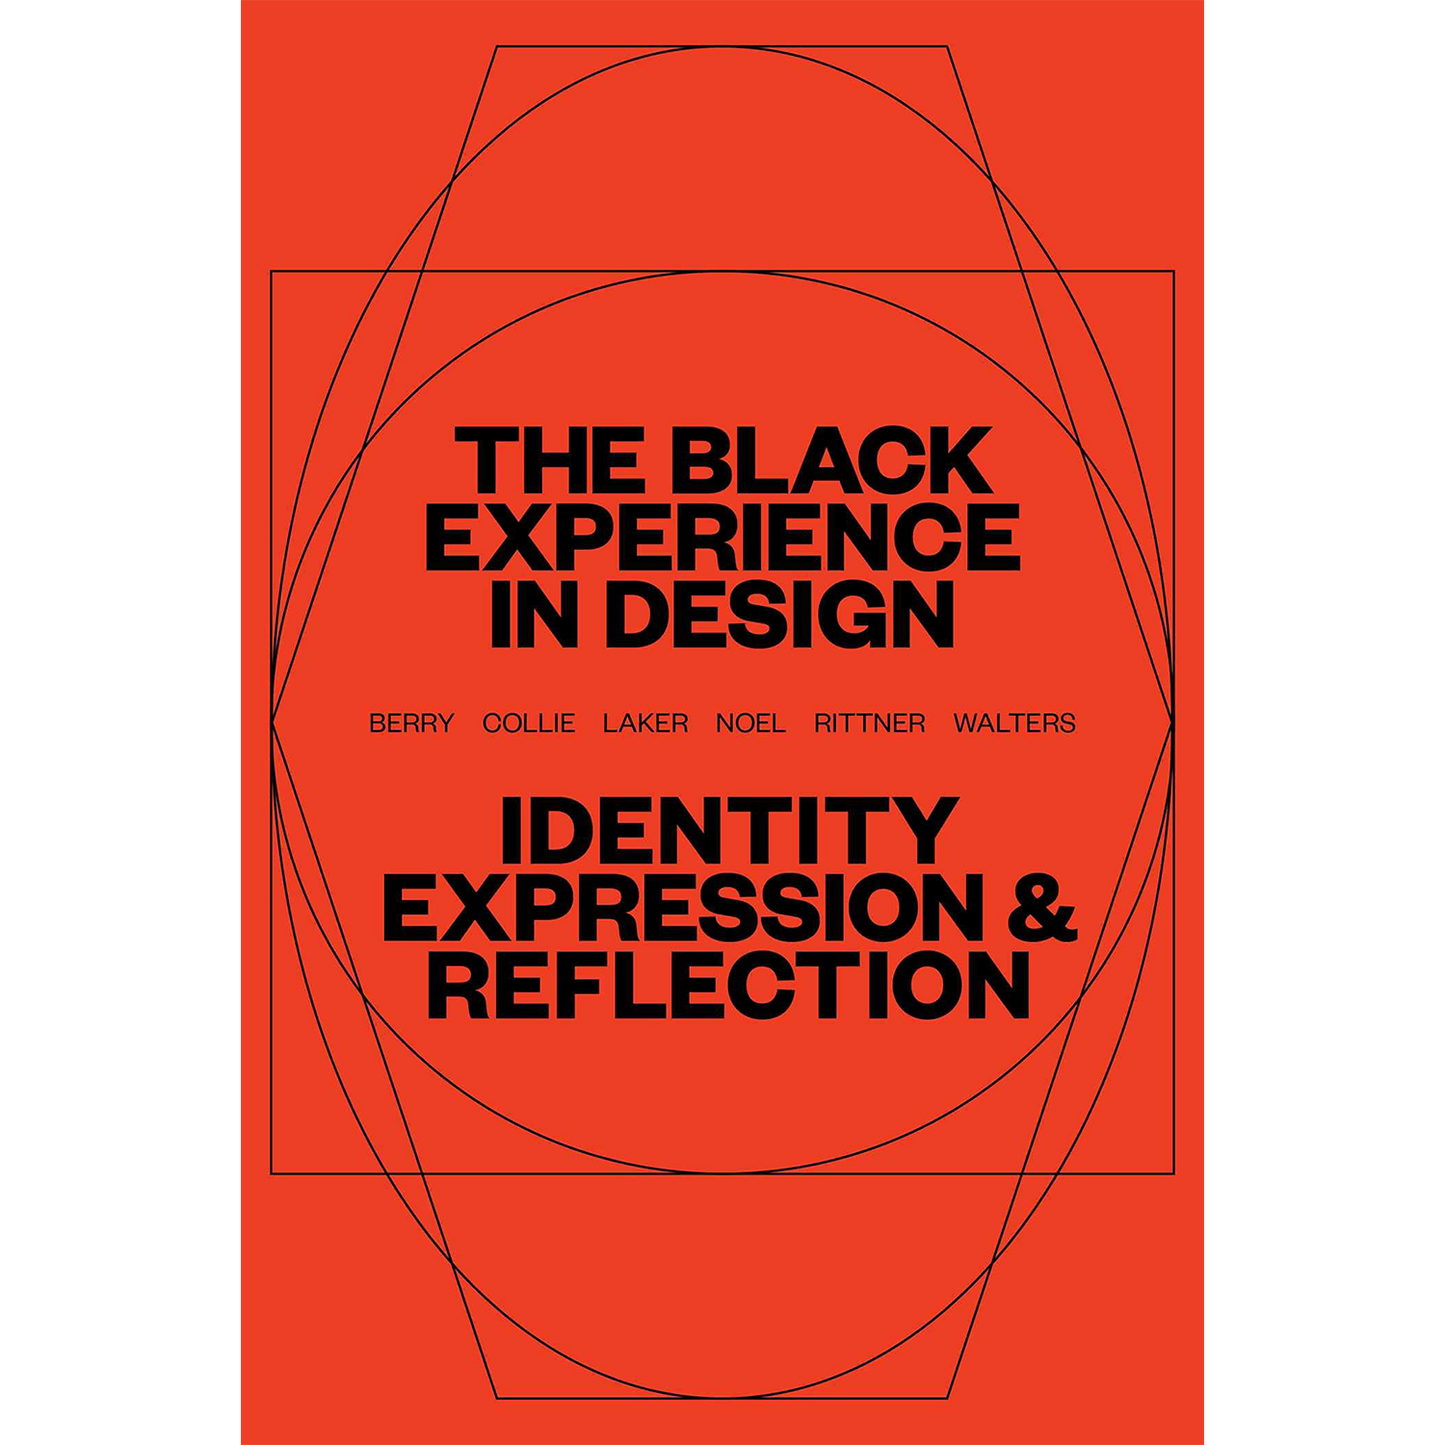 The Black Experience in Design: Identity, Expression & Reflection | Paperback